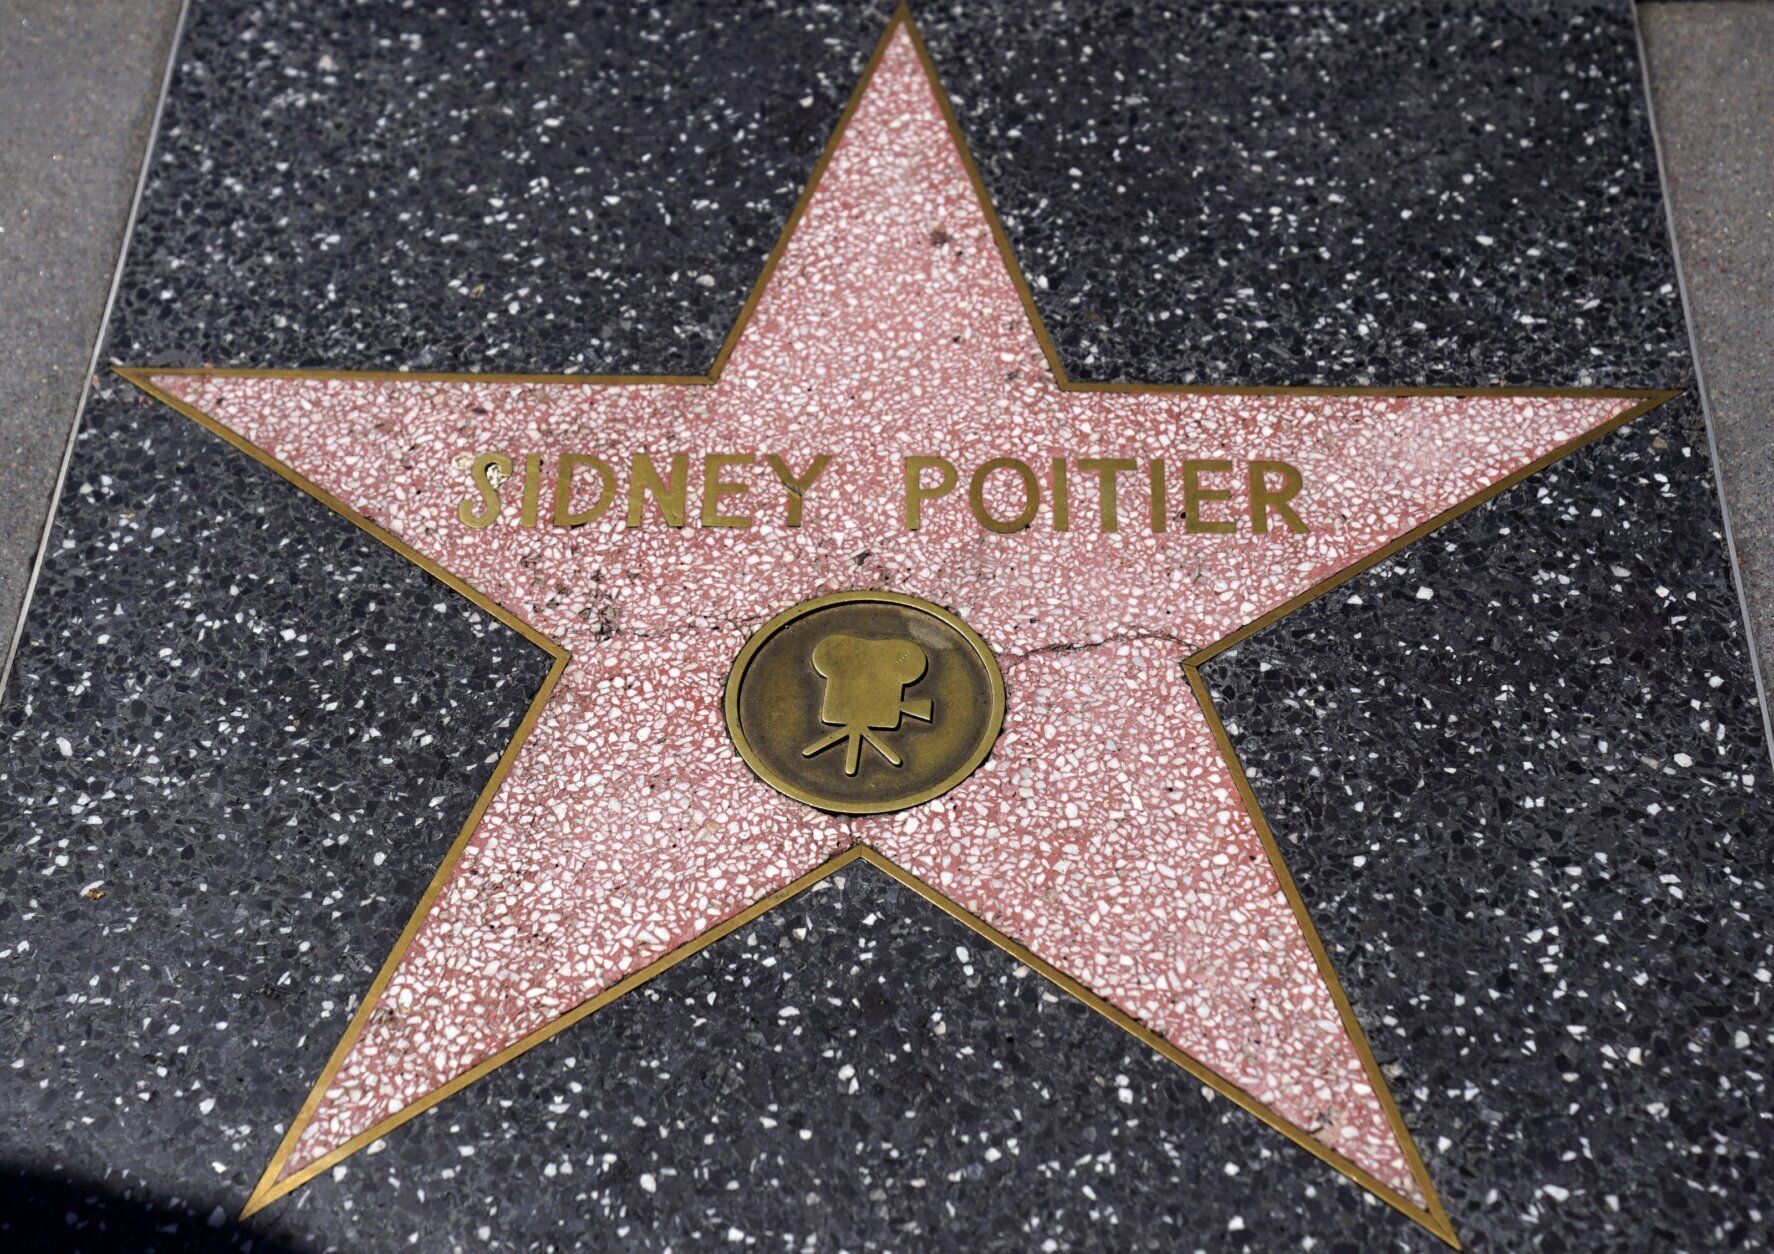 Reflection: Sidney Poitier and the right to be respected